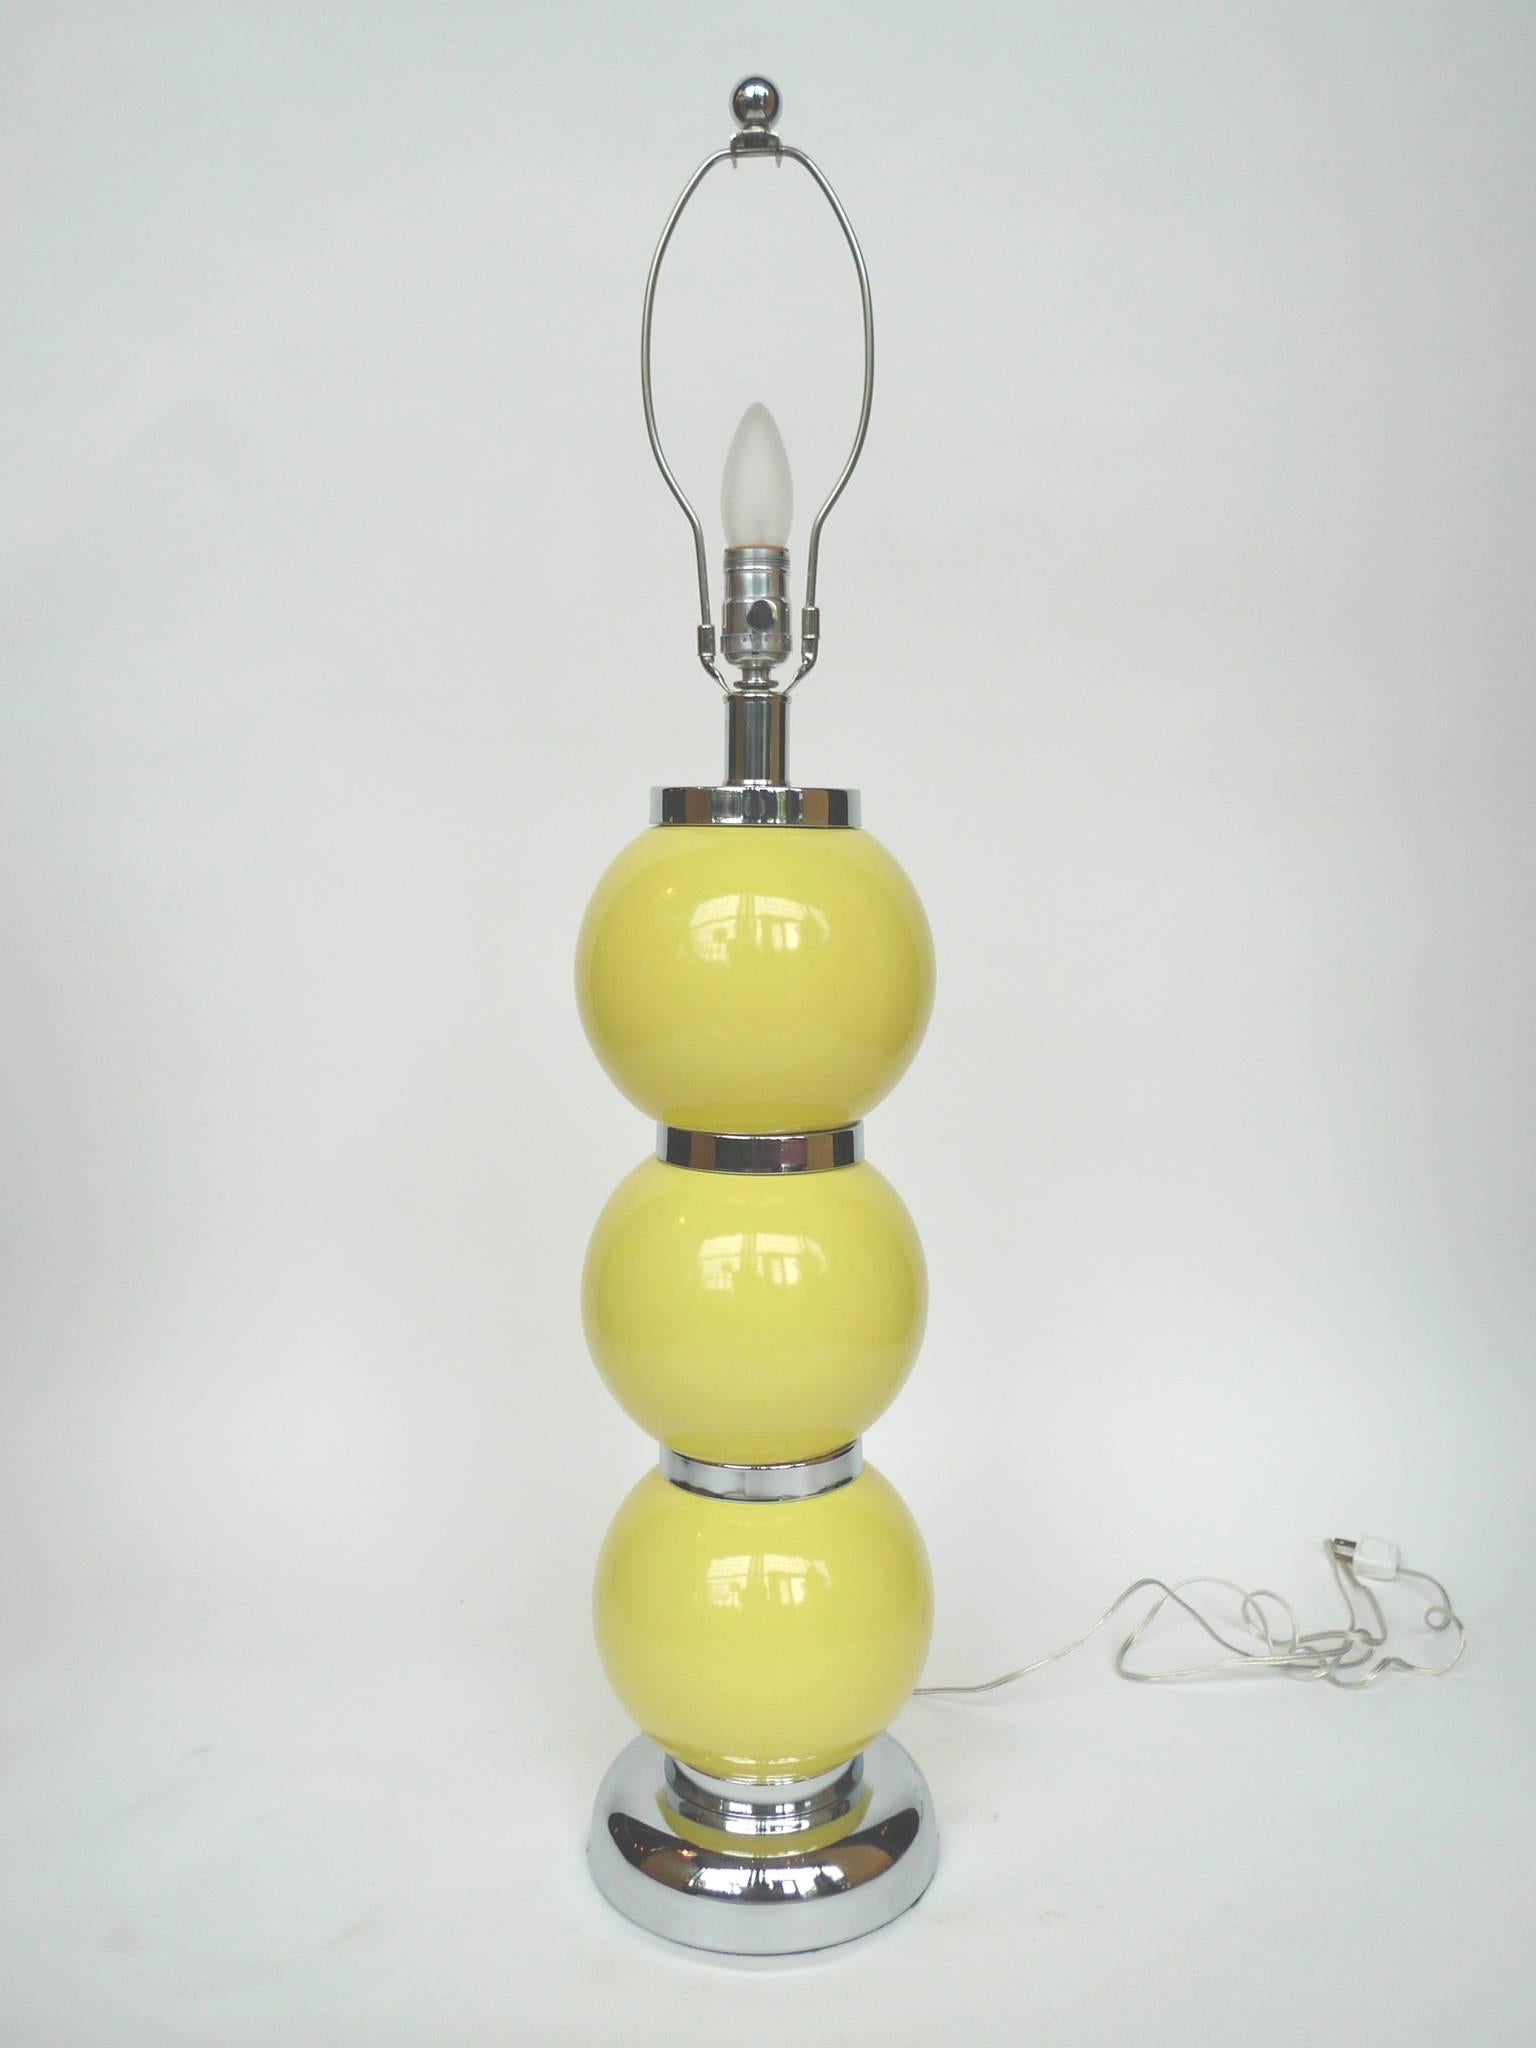 These striking lemon-yellow lamps are in a similar style to the stacked ball table lamps designed by George Kovacs. The spheres are glazed ceramic while the base and the segments between the spheres are chrome. These lamps are newly rewired and